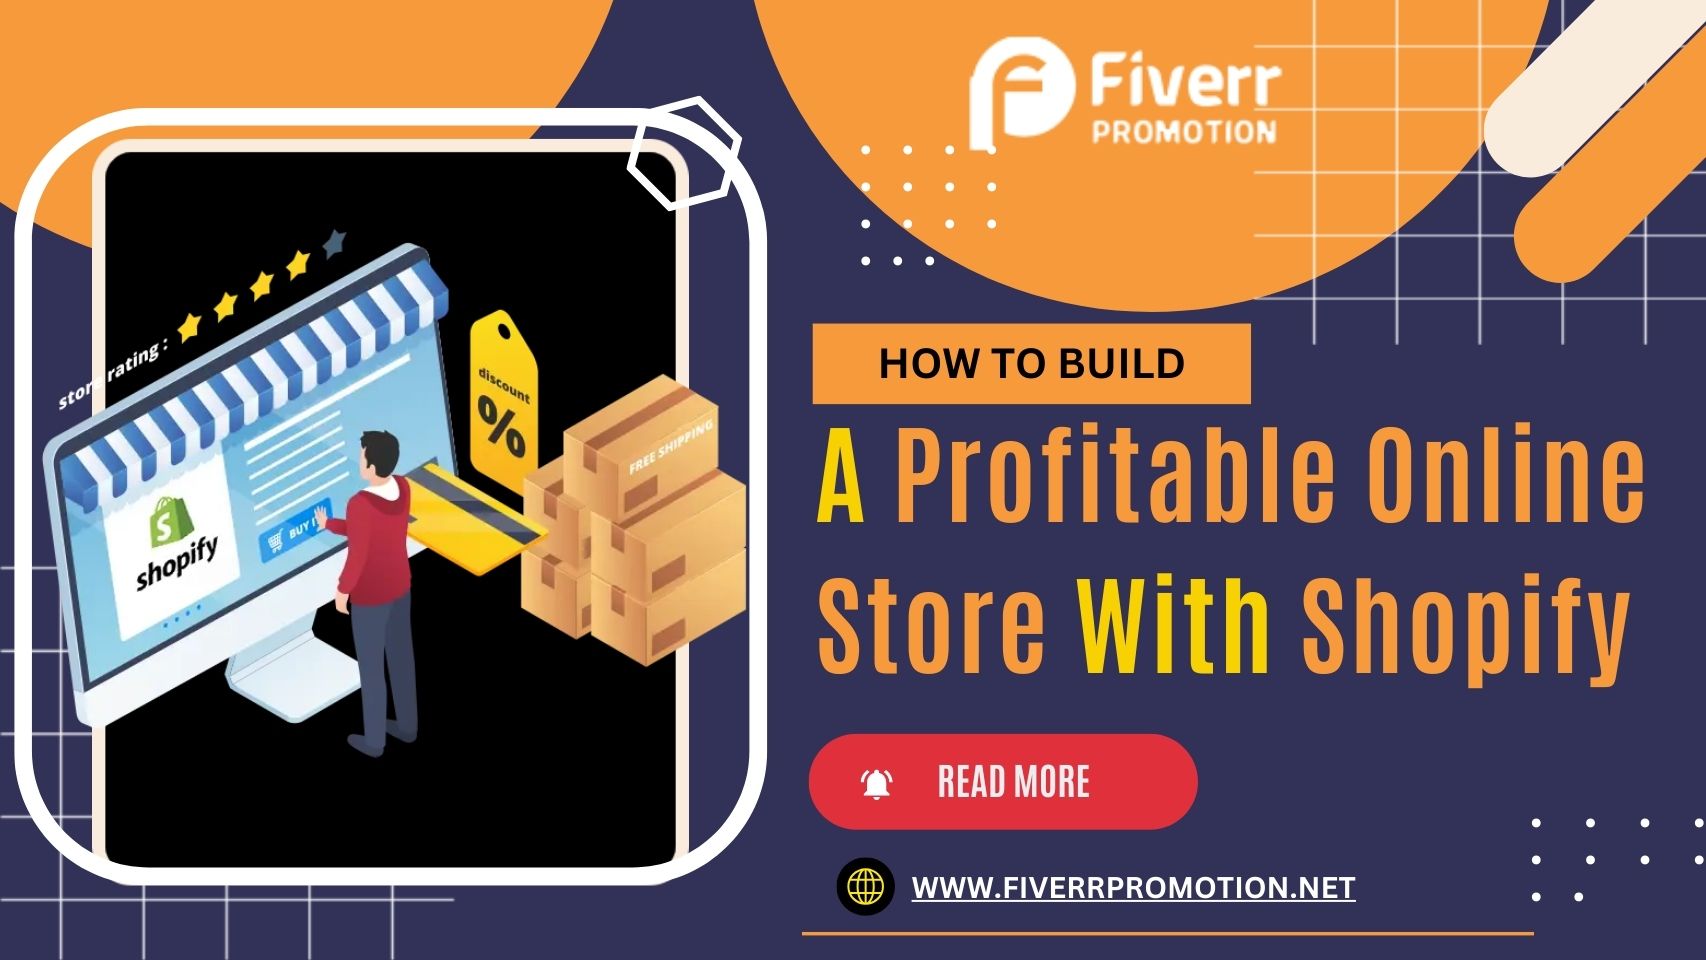 How to Build a Profitable Online Store with Shopify